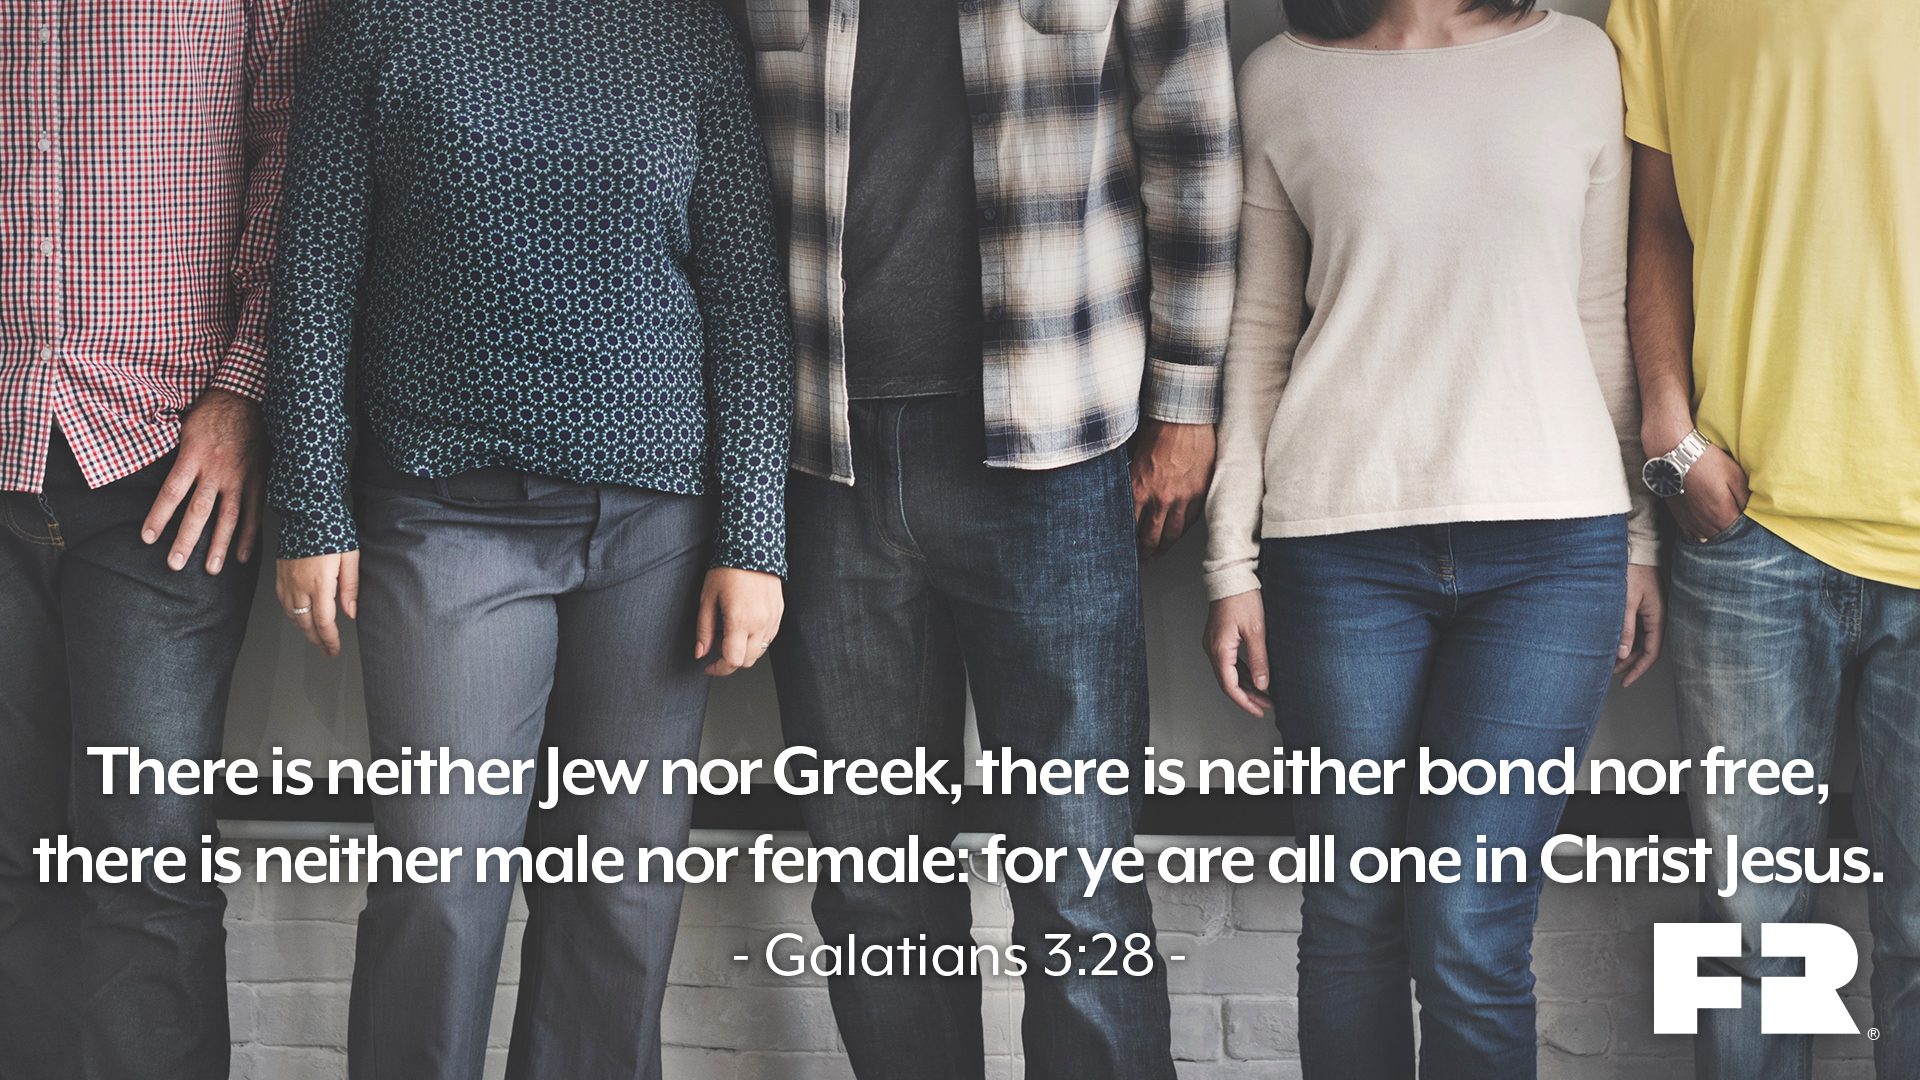 "There is neither Jew nor Greek, there is neither bond nor free, there is neither male nor female: for ye are all one in Christ Jesus."